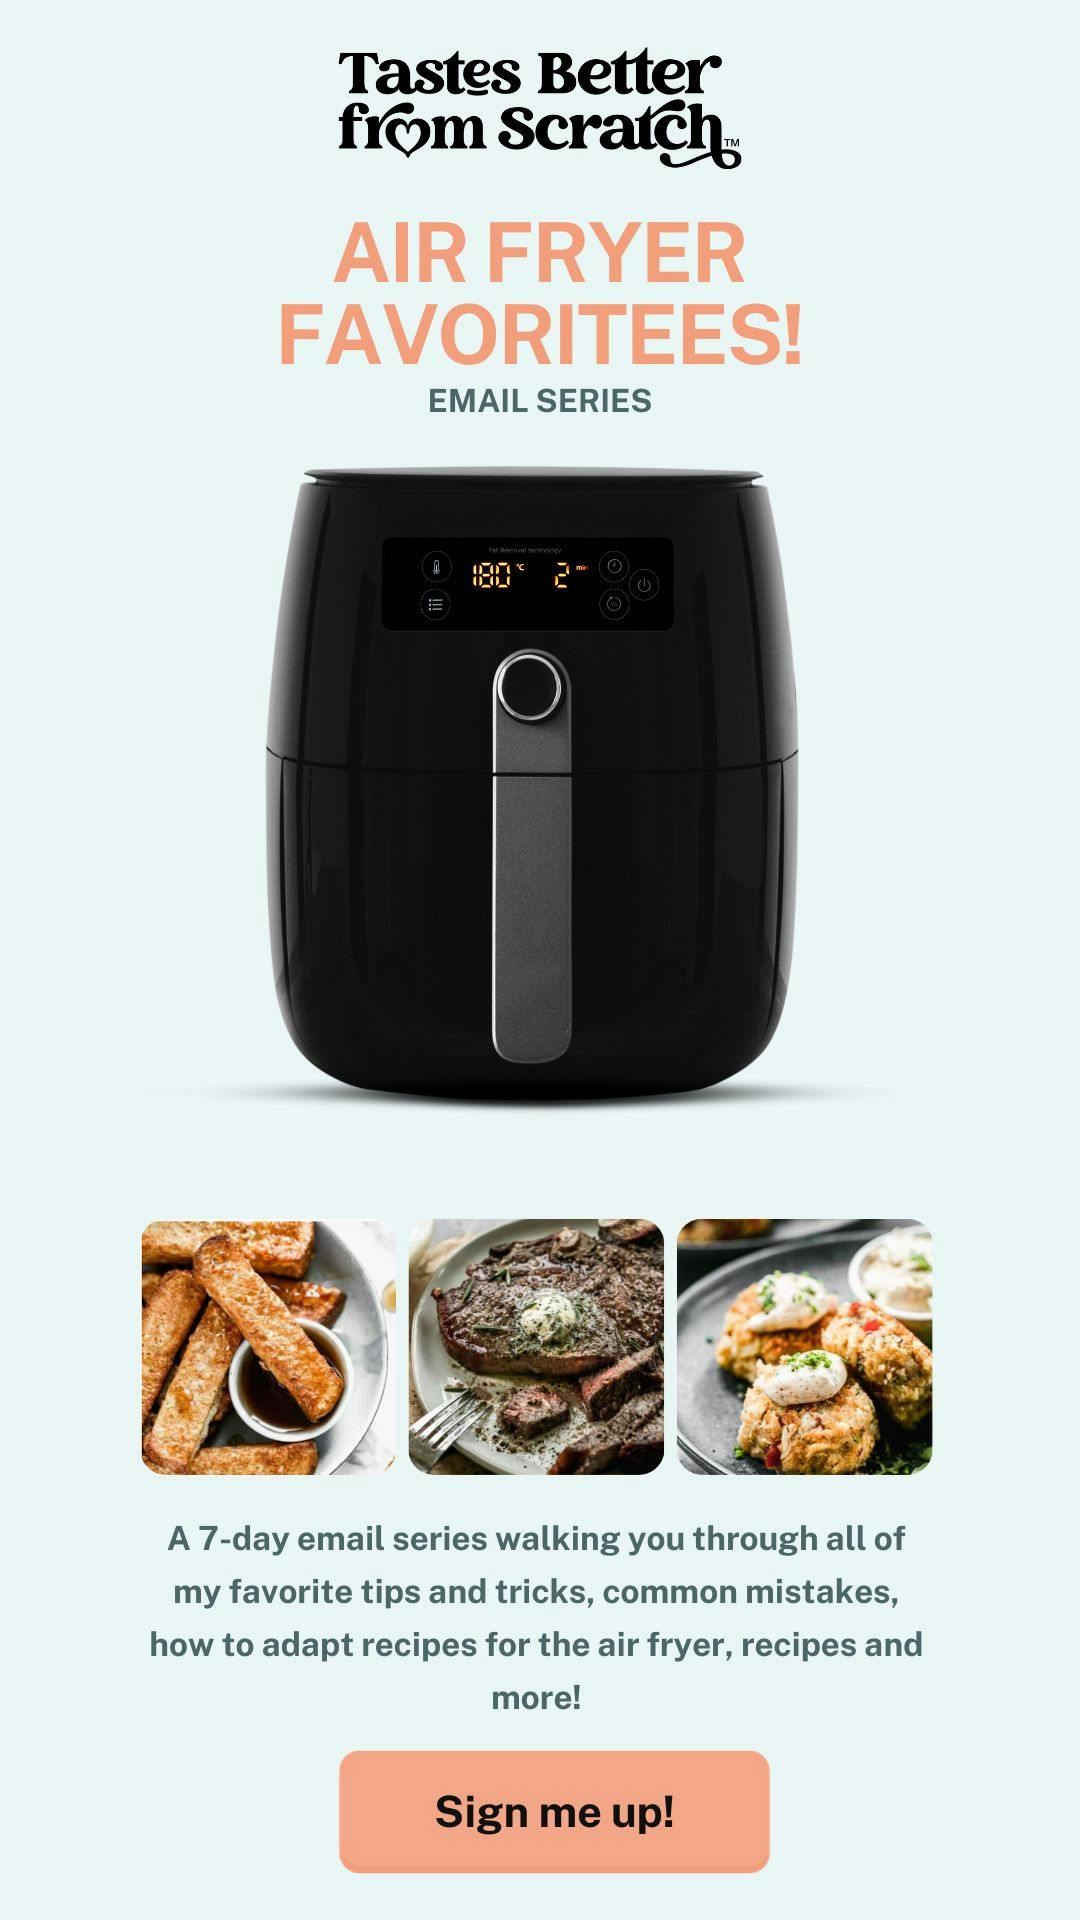 A 7-day email series walking you through all of my favorite tips and tricks, common mistakes, how to adapt recipes for the air fryer, recipes and more! Sign up by clicking the picture. 